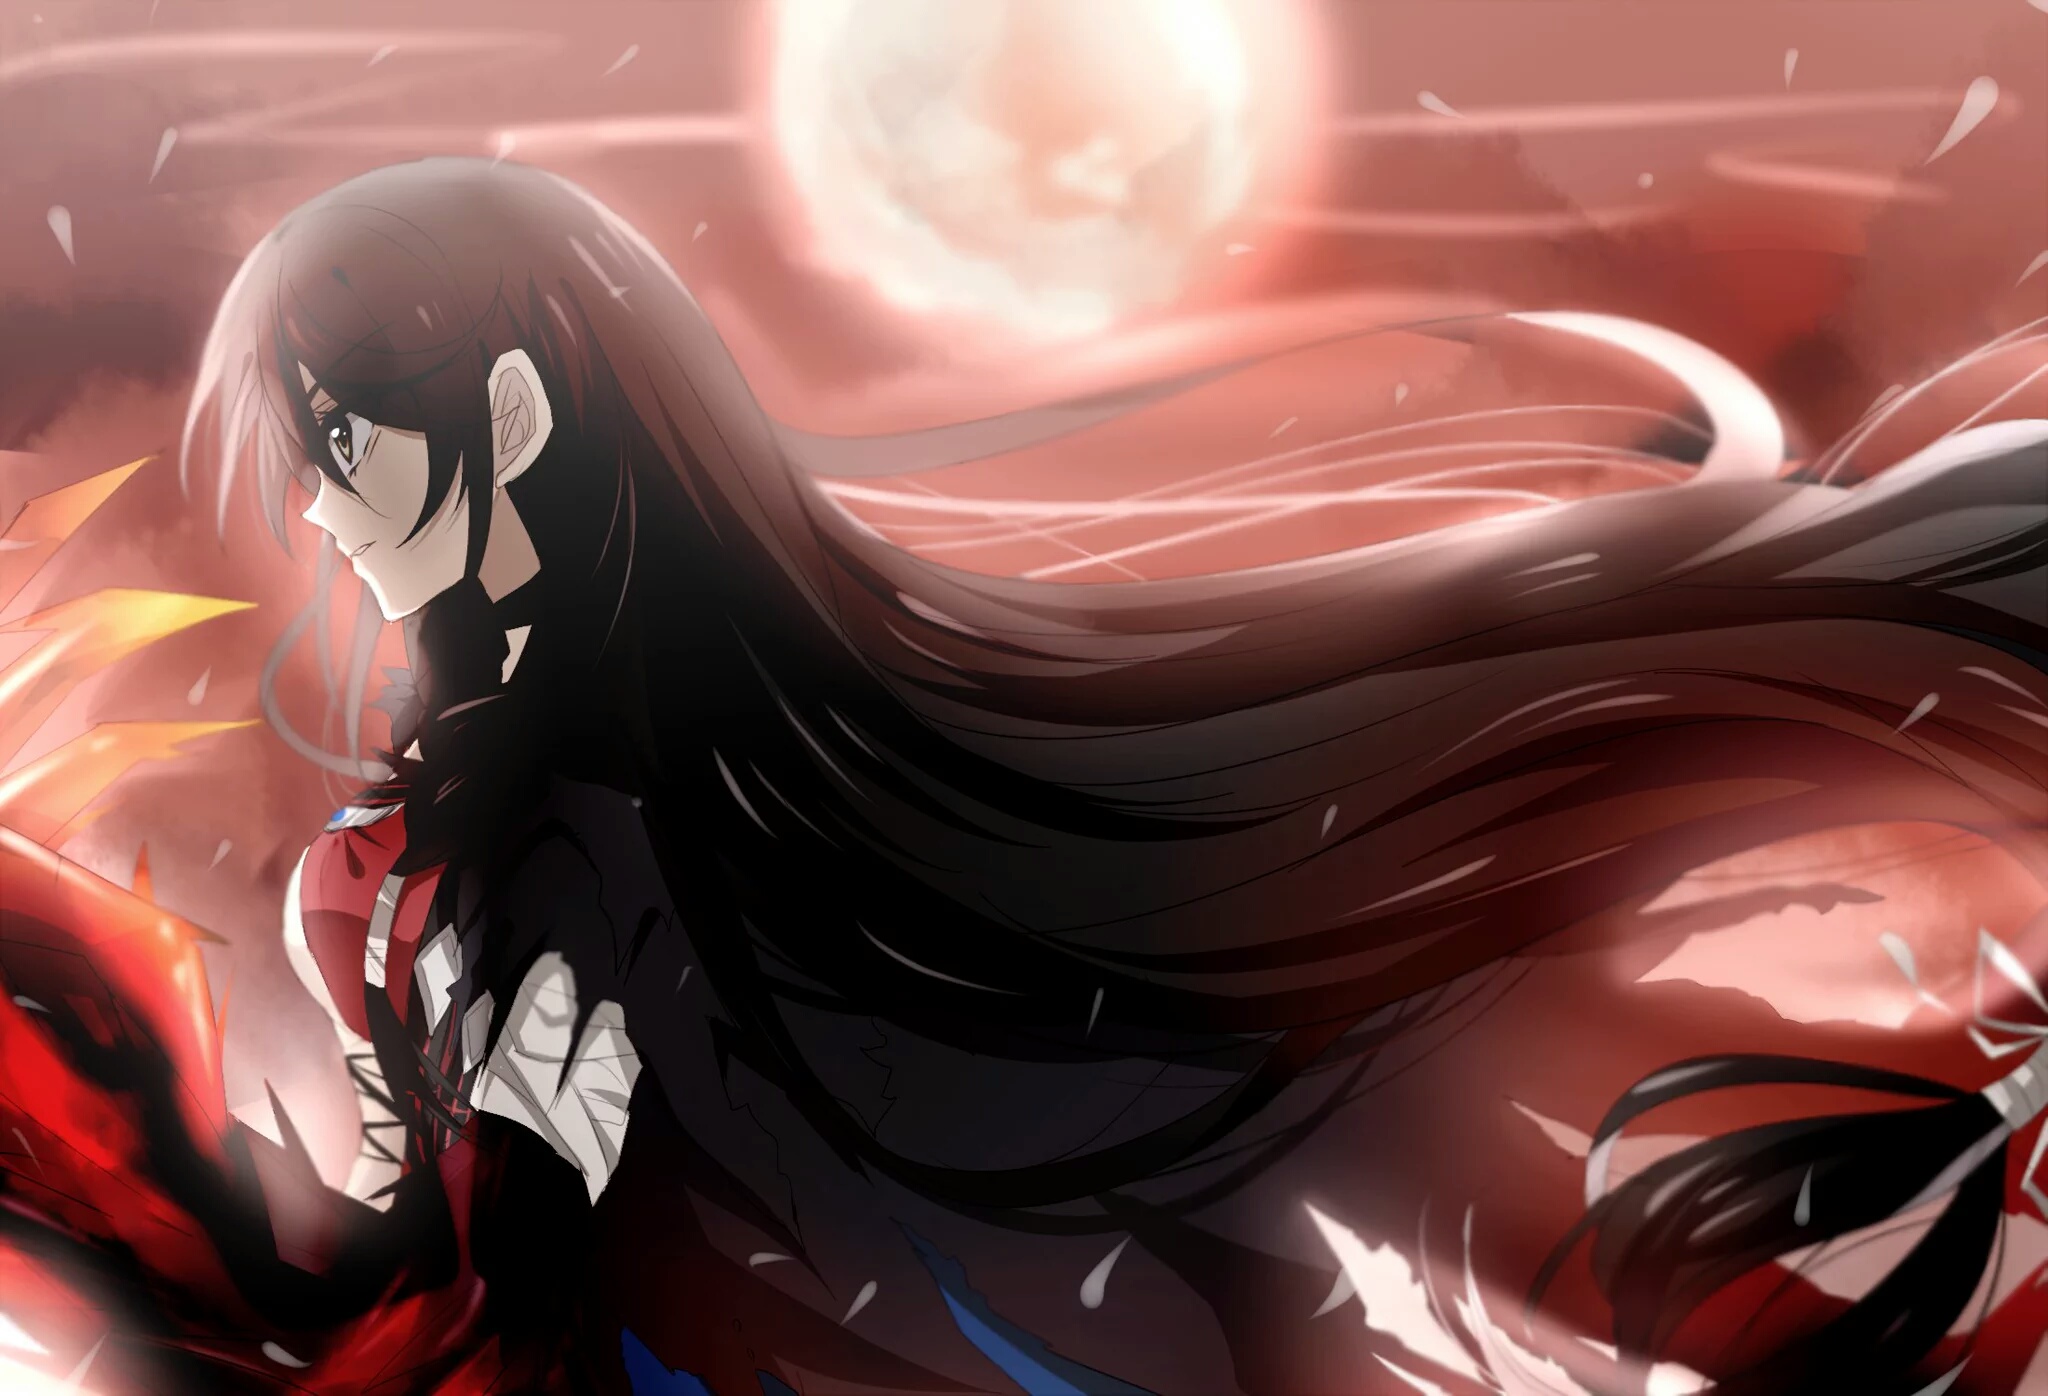 Video Game Tales of Berseria HD Wallpaper | Background Image